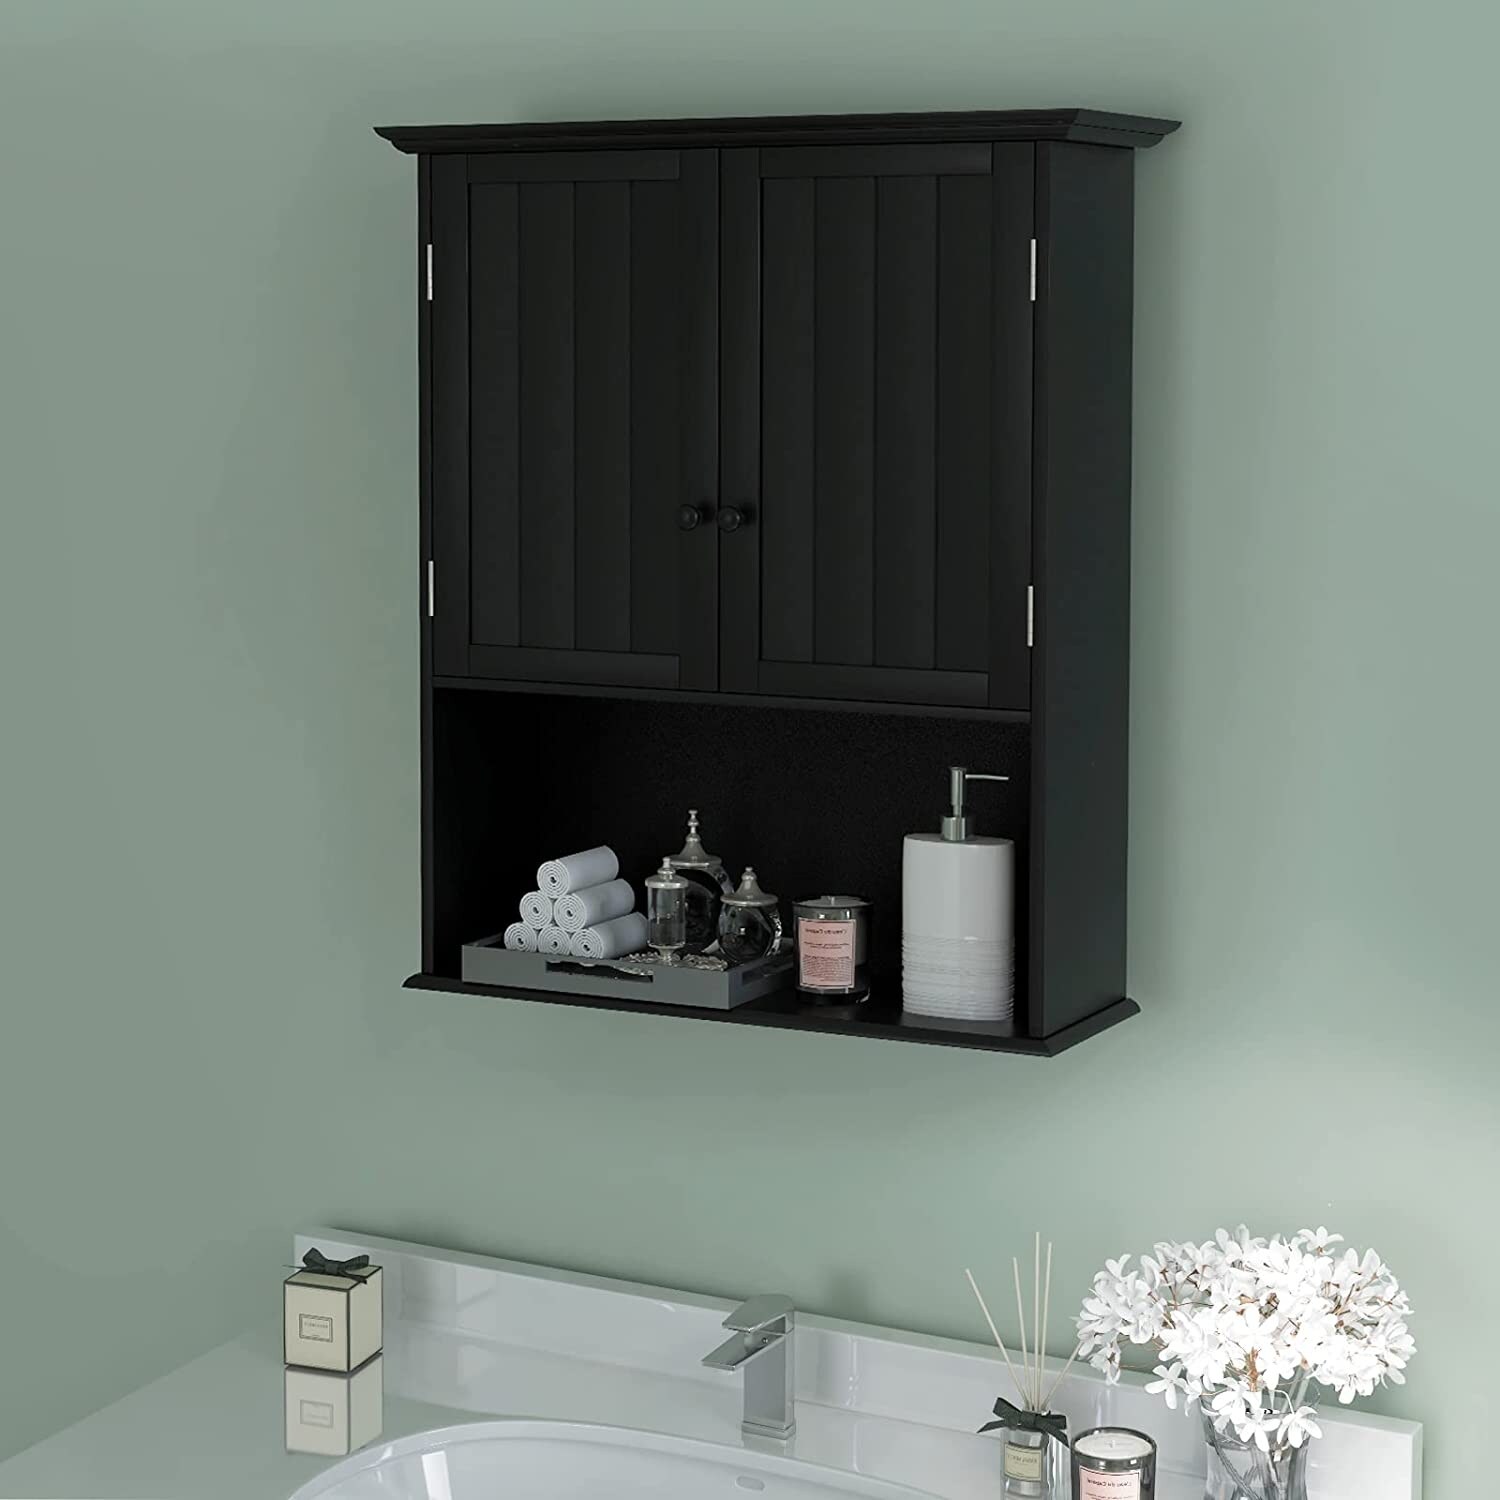 https://ak1.ostkcdn.com/images/products/is/images/direct/db8a576a1668e5fc85a0e9c90f9d644960a77707/Wall-Mount-Bathroom-Cabinet-Wooden-Medicine-Cabinet-Storage-Organizer-with-2-Doors-and-1-Shelf-Cottage-Collection-Wall-Cabinet.jpg